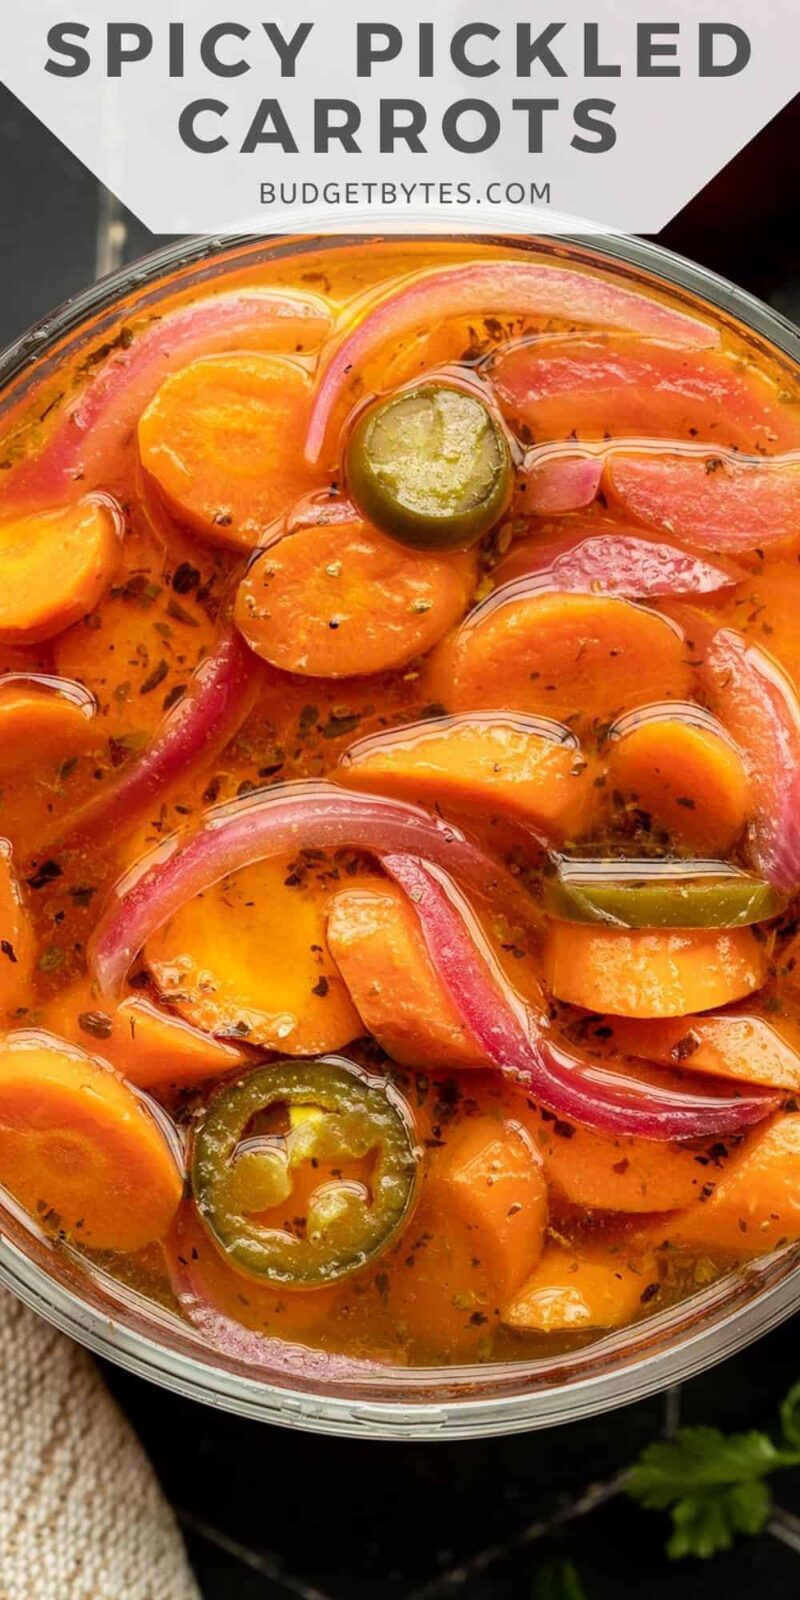 Cover the spicy carrots in a bowl.